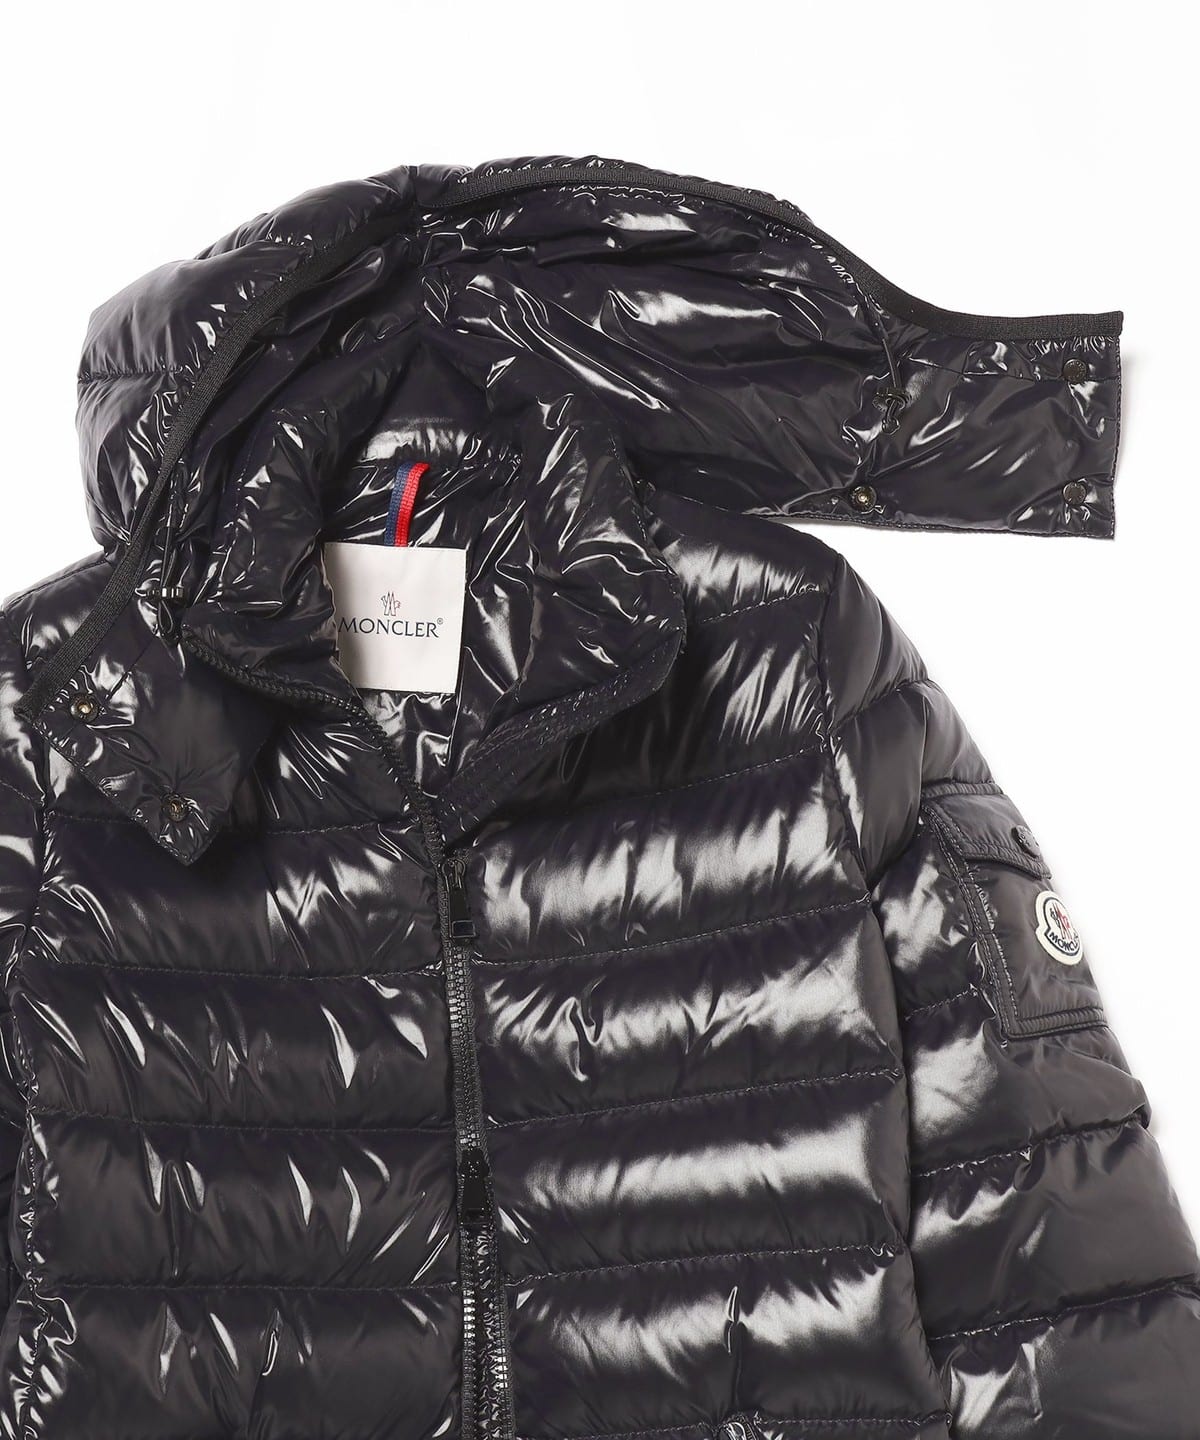 Demi-Luxe BEAMS（デミルクス ビームス）【POP UP STORE開催】MONCLER 